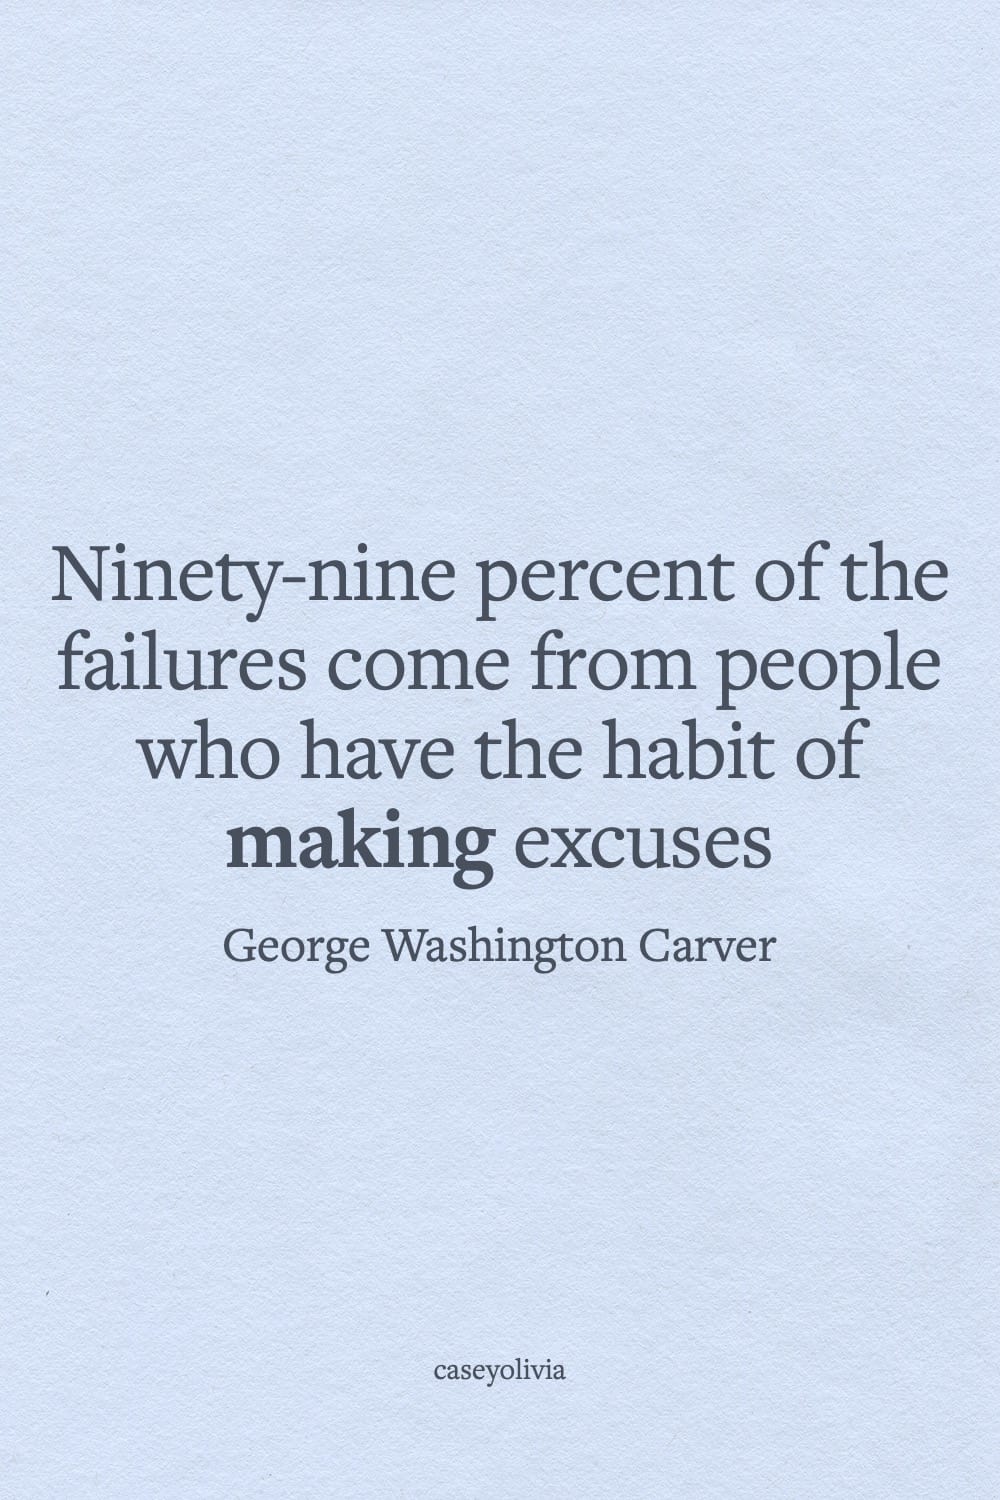 ninety nine percent of the failures from making excuses